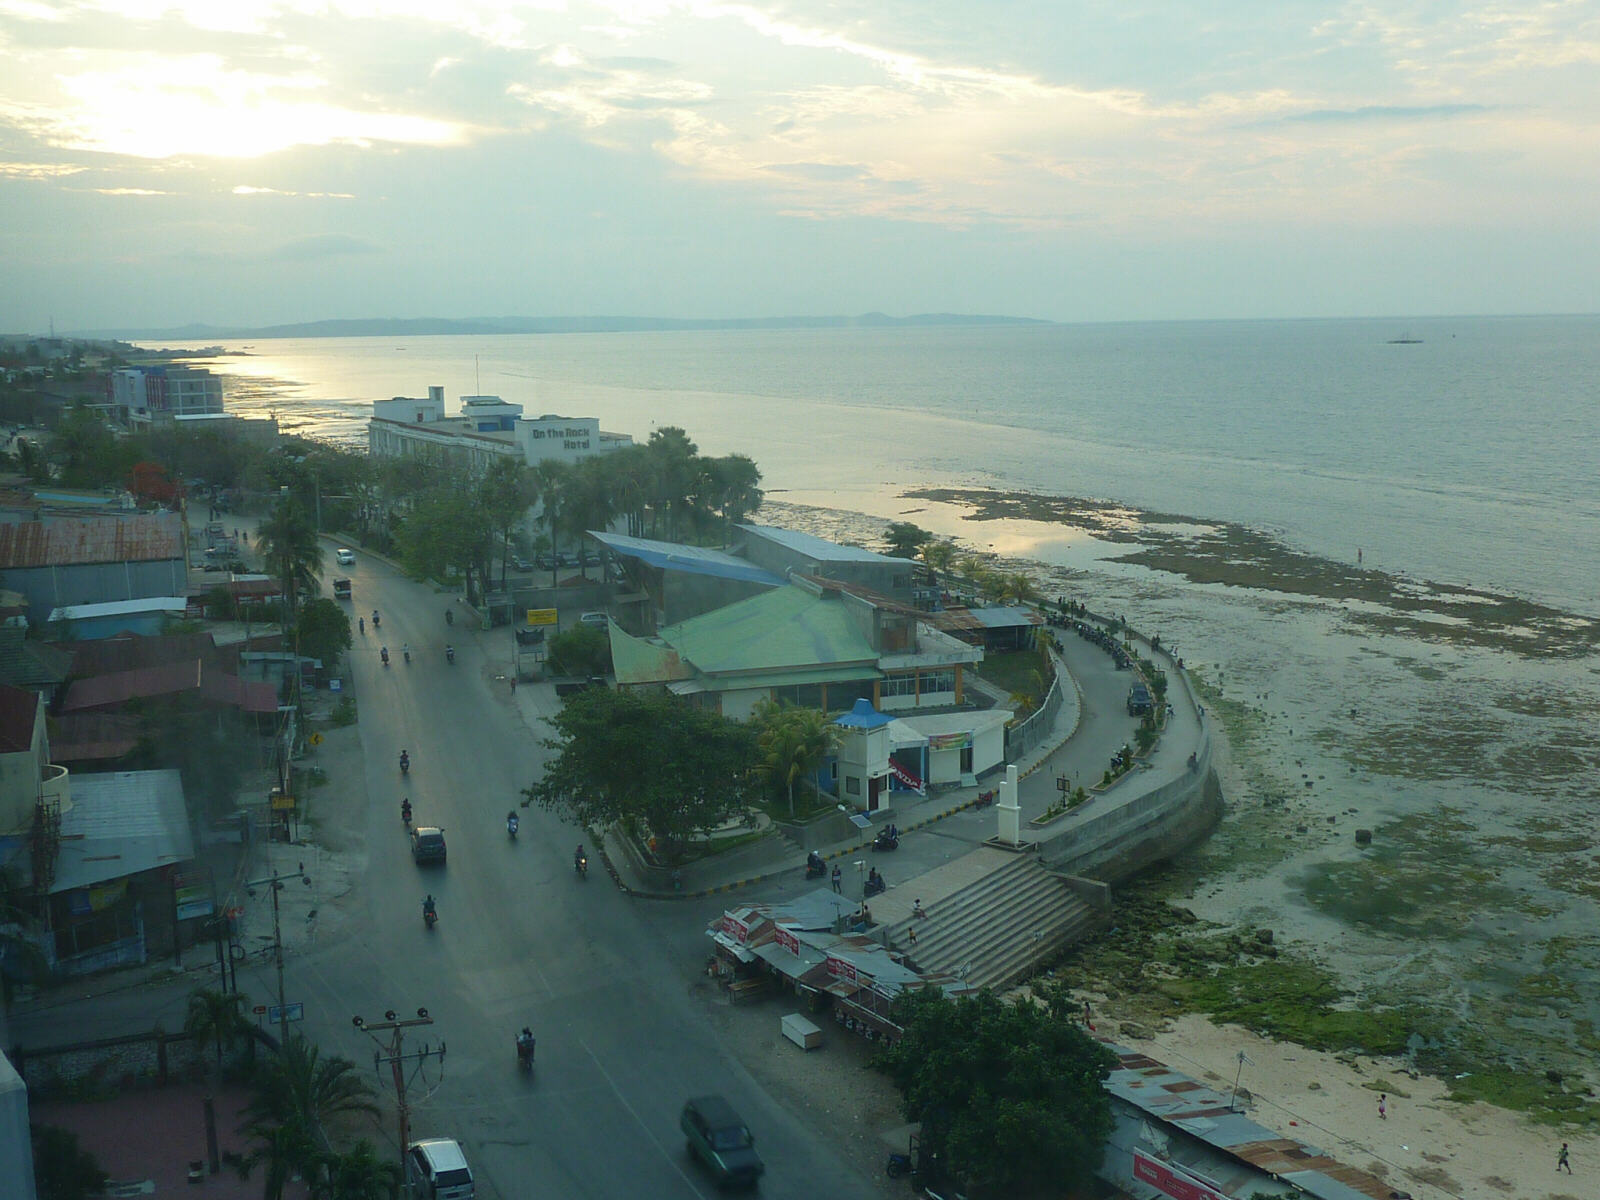 Seafront from the Aston hotel in Kupang, Timor island